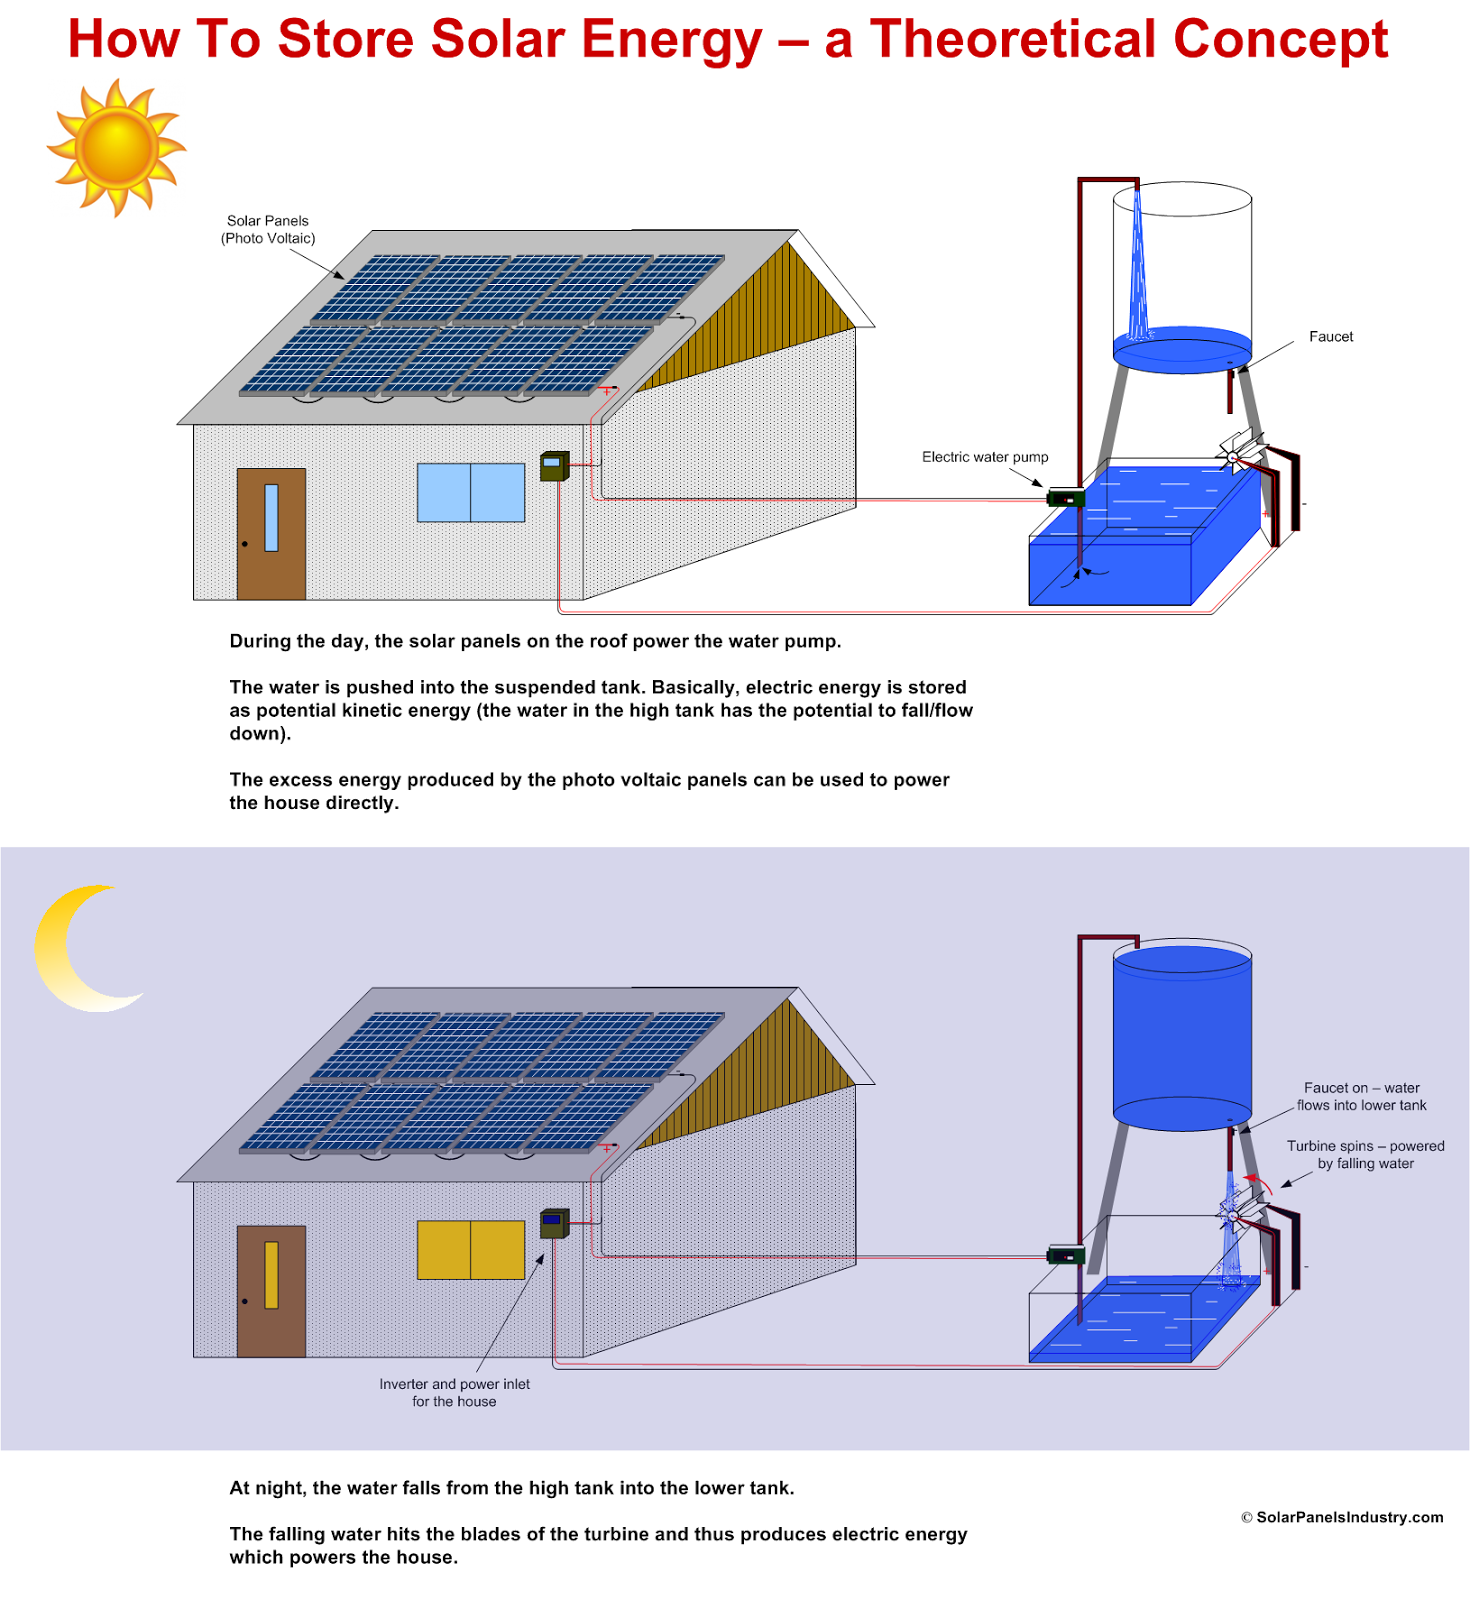 How To Store Solar Energy - A Theoretical Concept - Infographic